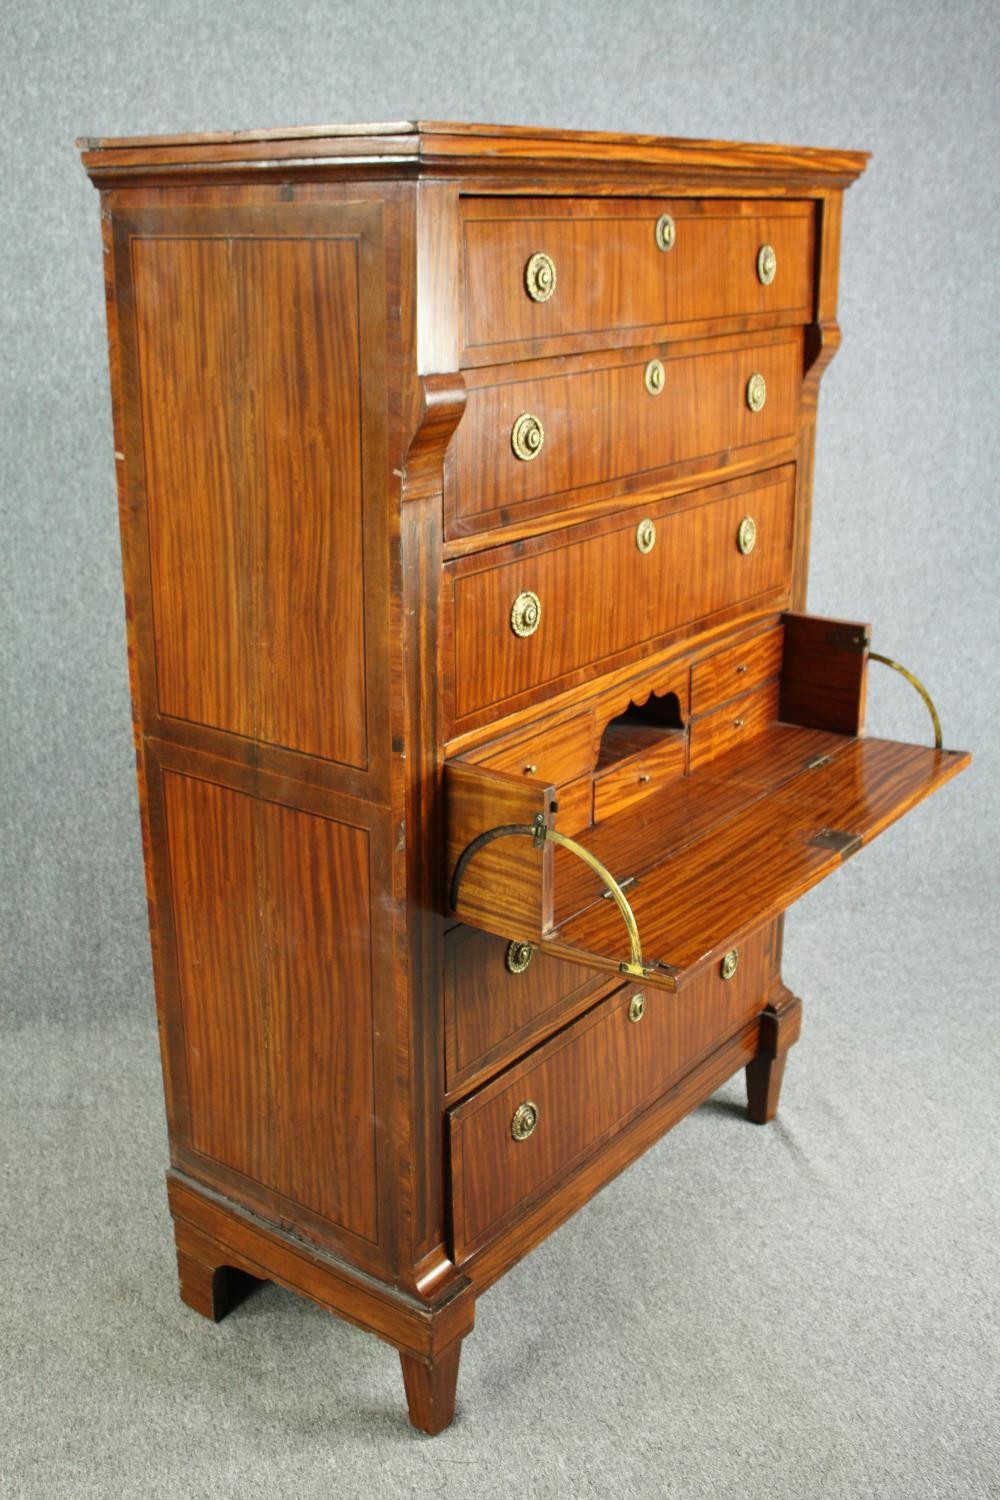 An early 19th century satinwood and crossbanded Biedermeier secretaire chest of six drawers with a - Image 4 of 8